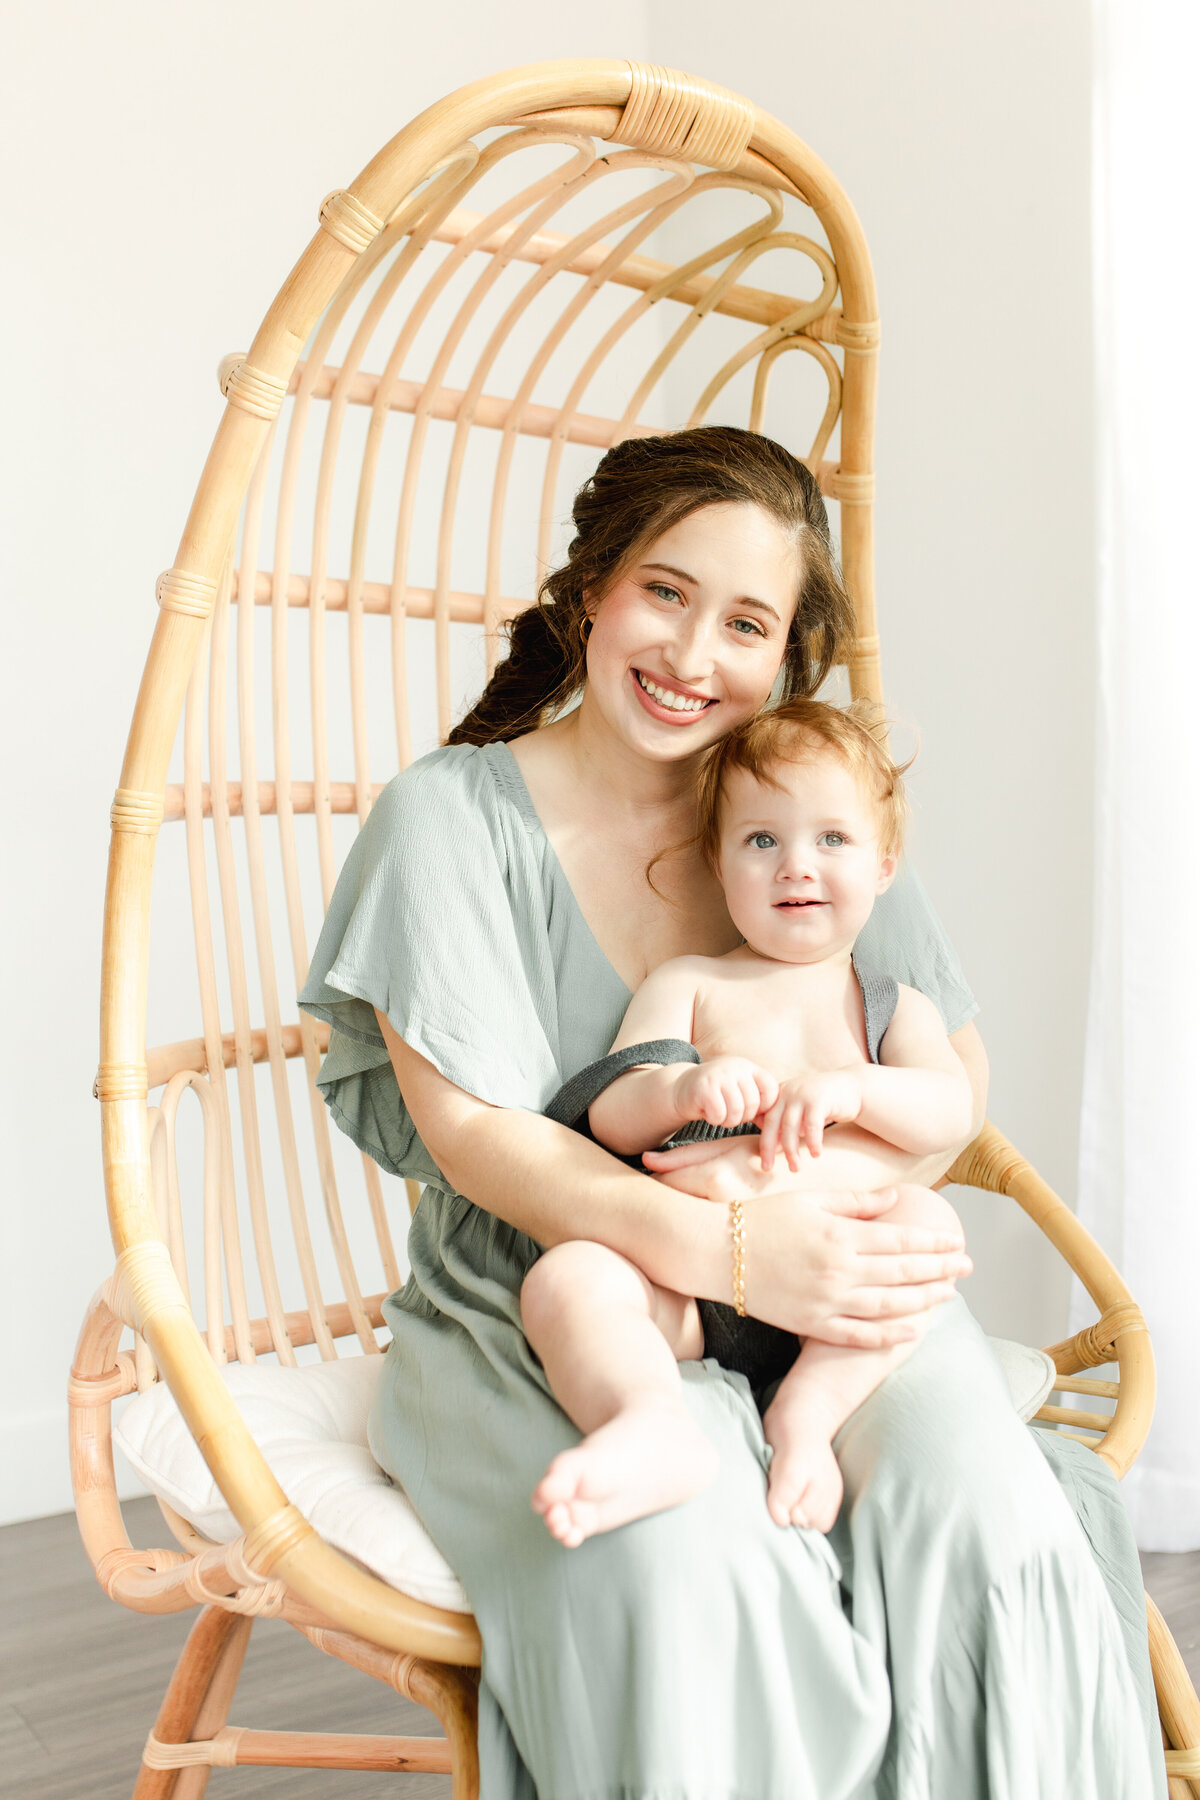 A mother wearing a sage green dress sits in a rattan chair and holds her young toddler in her arms who is wearing a green jumper in front of a white backdrop